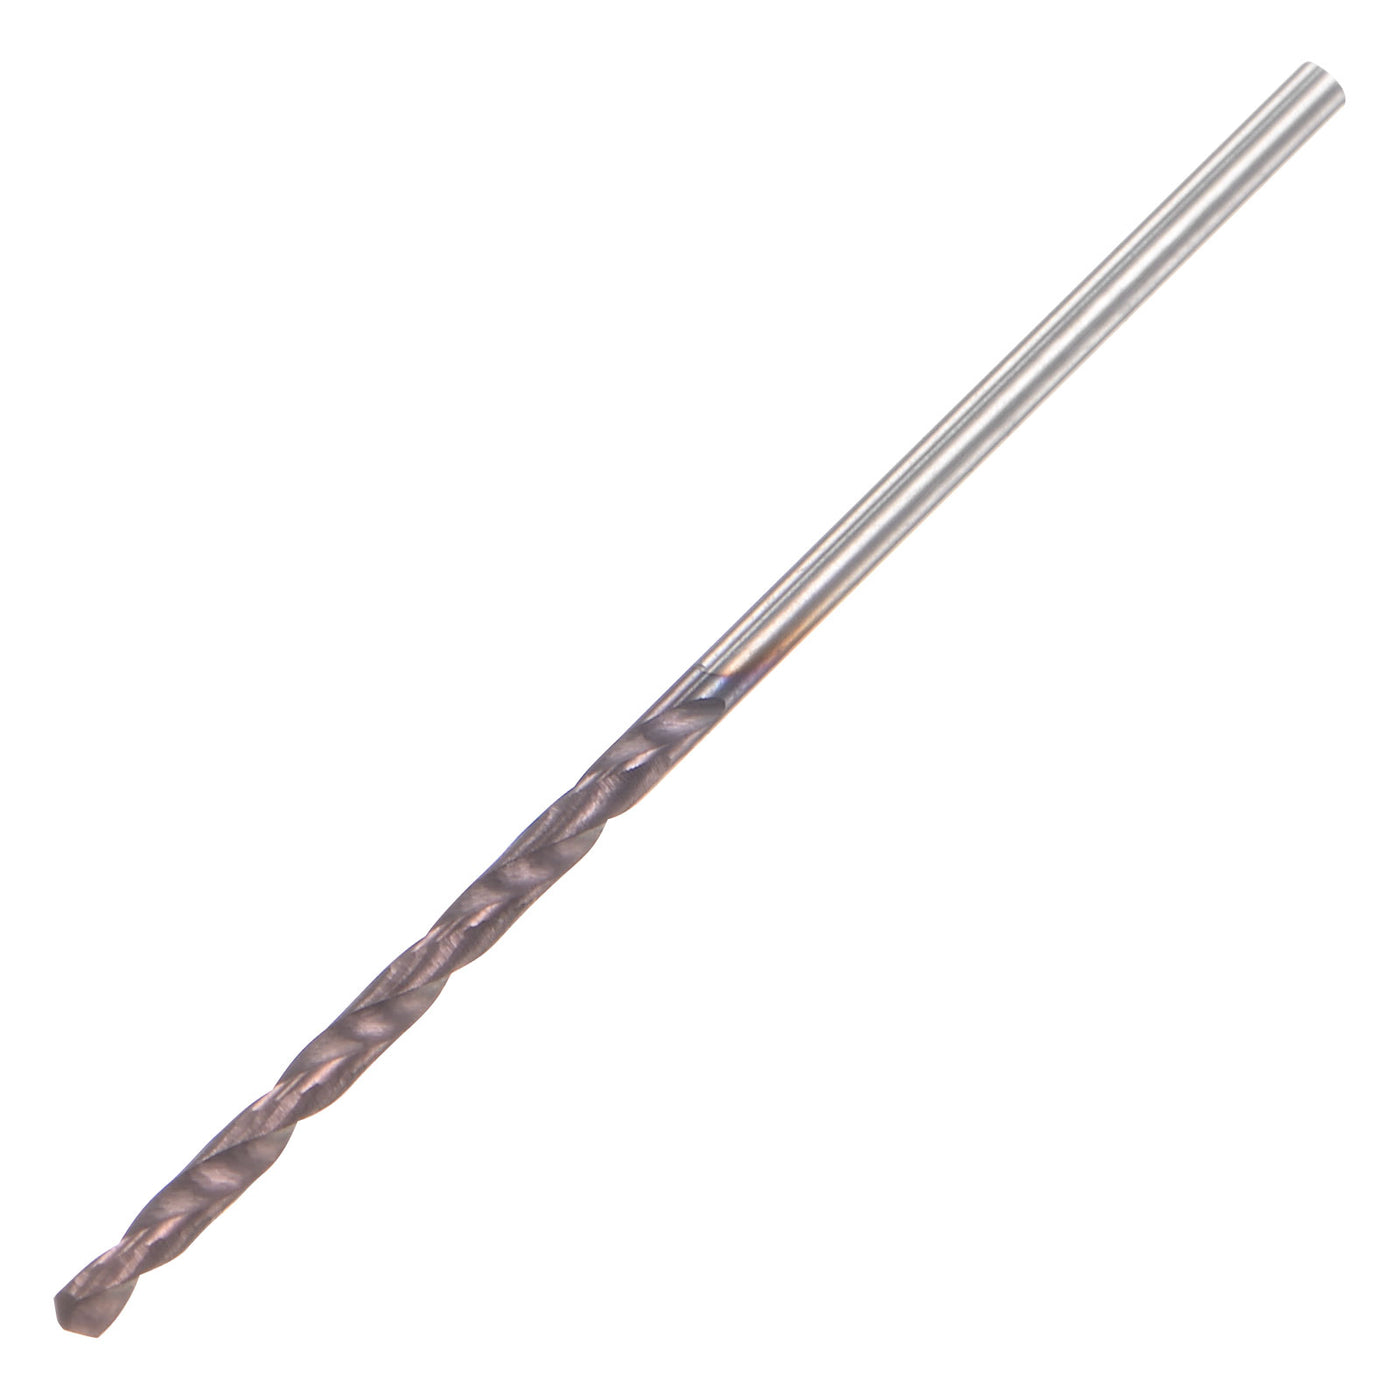 uxcell Uxcell 1.1mm DIN K45 Tungsten Carbide AlTiSin Coated Drill Bit for Stainless Steel